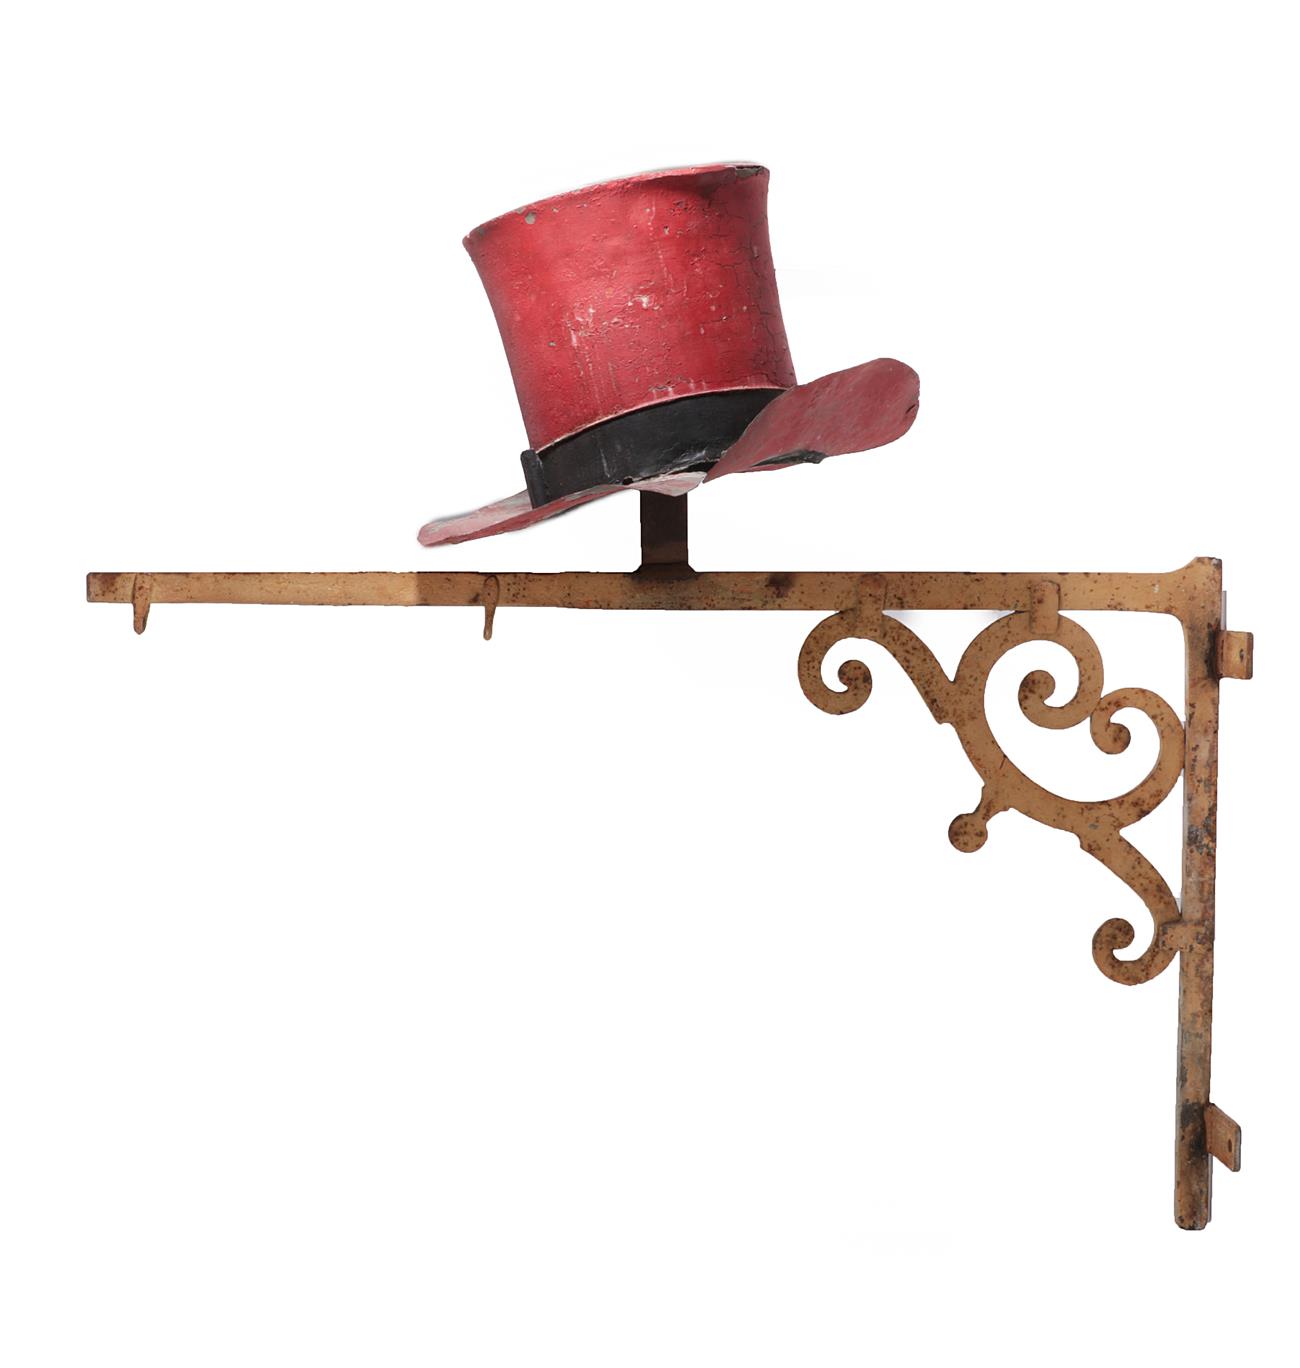 Lot 41 - A Painted Metal Top Hat Shop Sign, painted red with a black band, 35cm high; mounted on A...